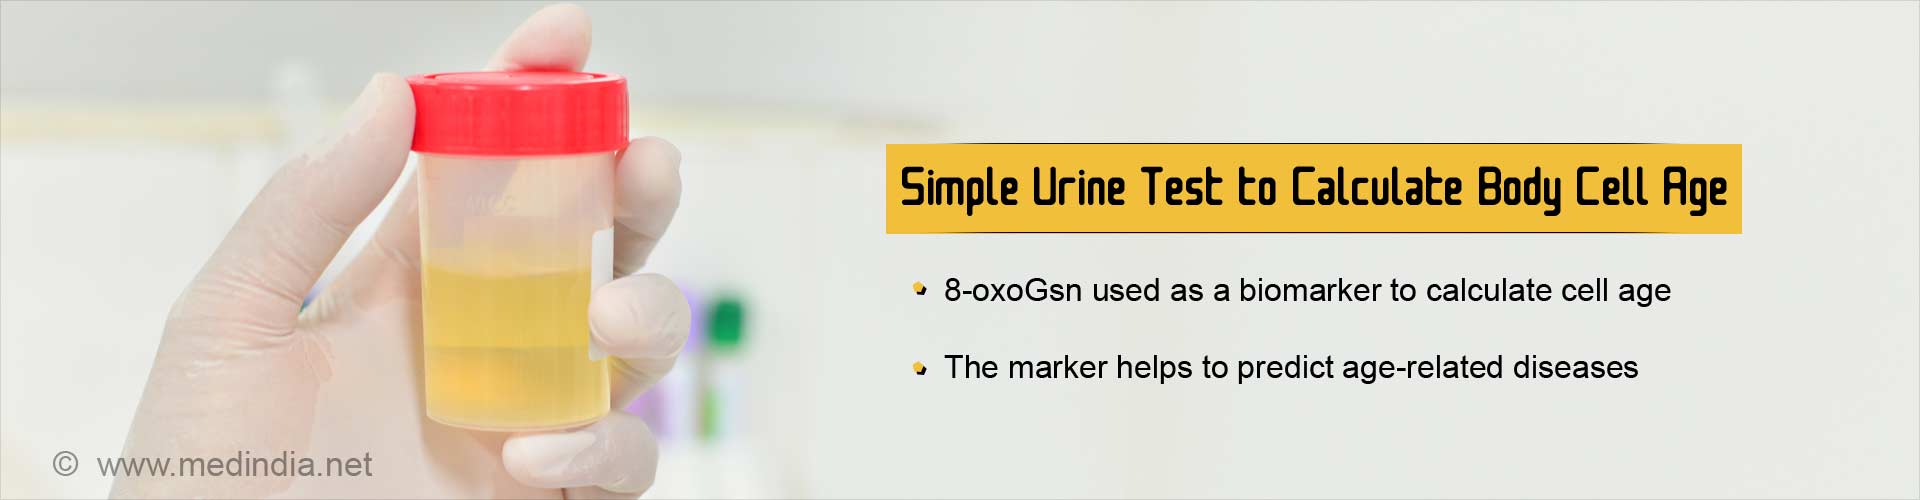 simple urine test to calculate body cell age
- 8-oxoGsn used as a biomarker to calculate cell age
- the marker helps o predict age-related diseases